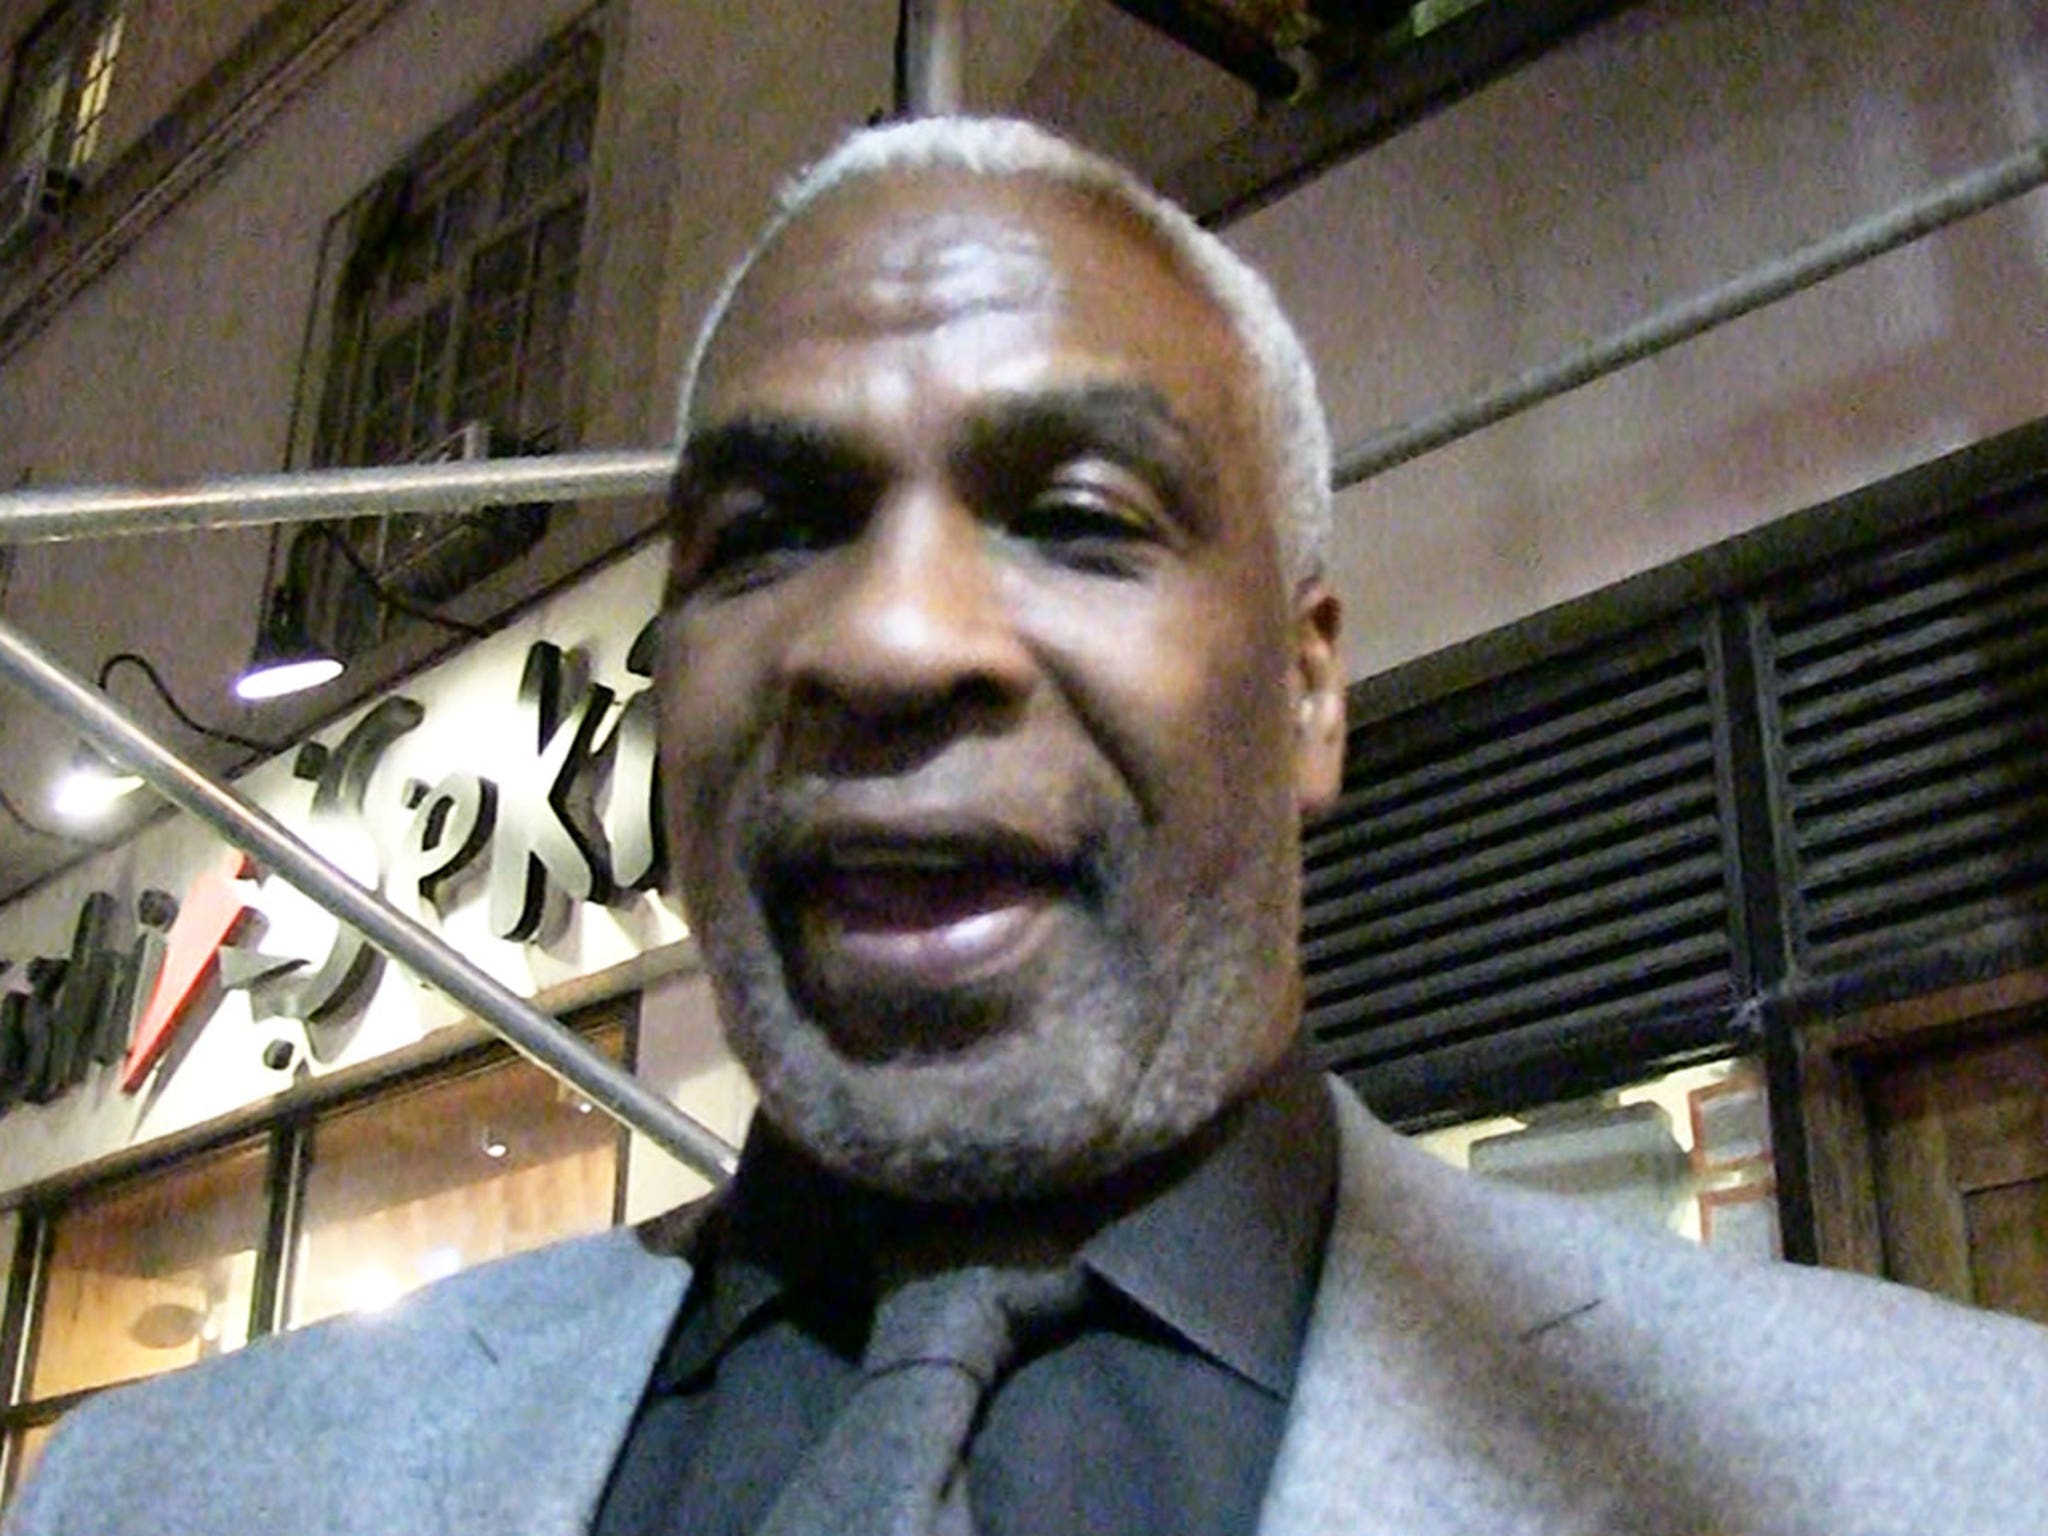 Charles Oakley gripes about Patrick Ewing, wants to 'smack